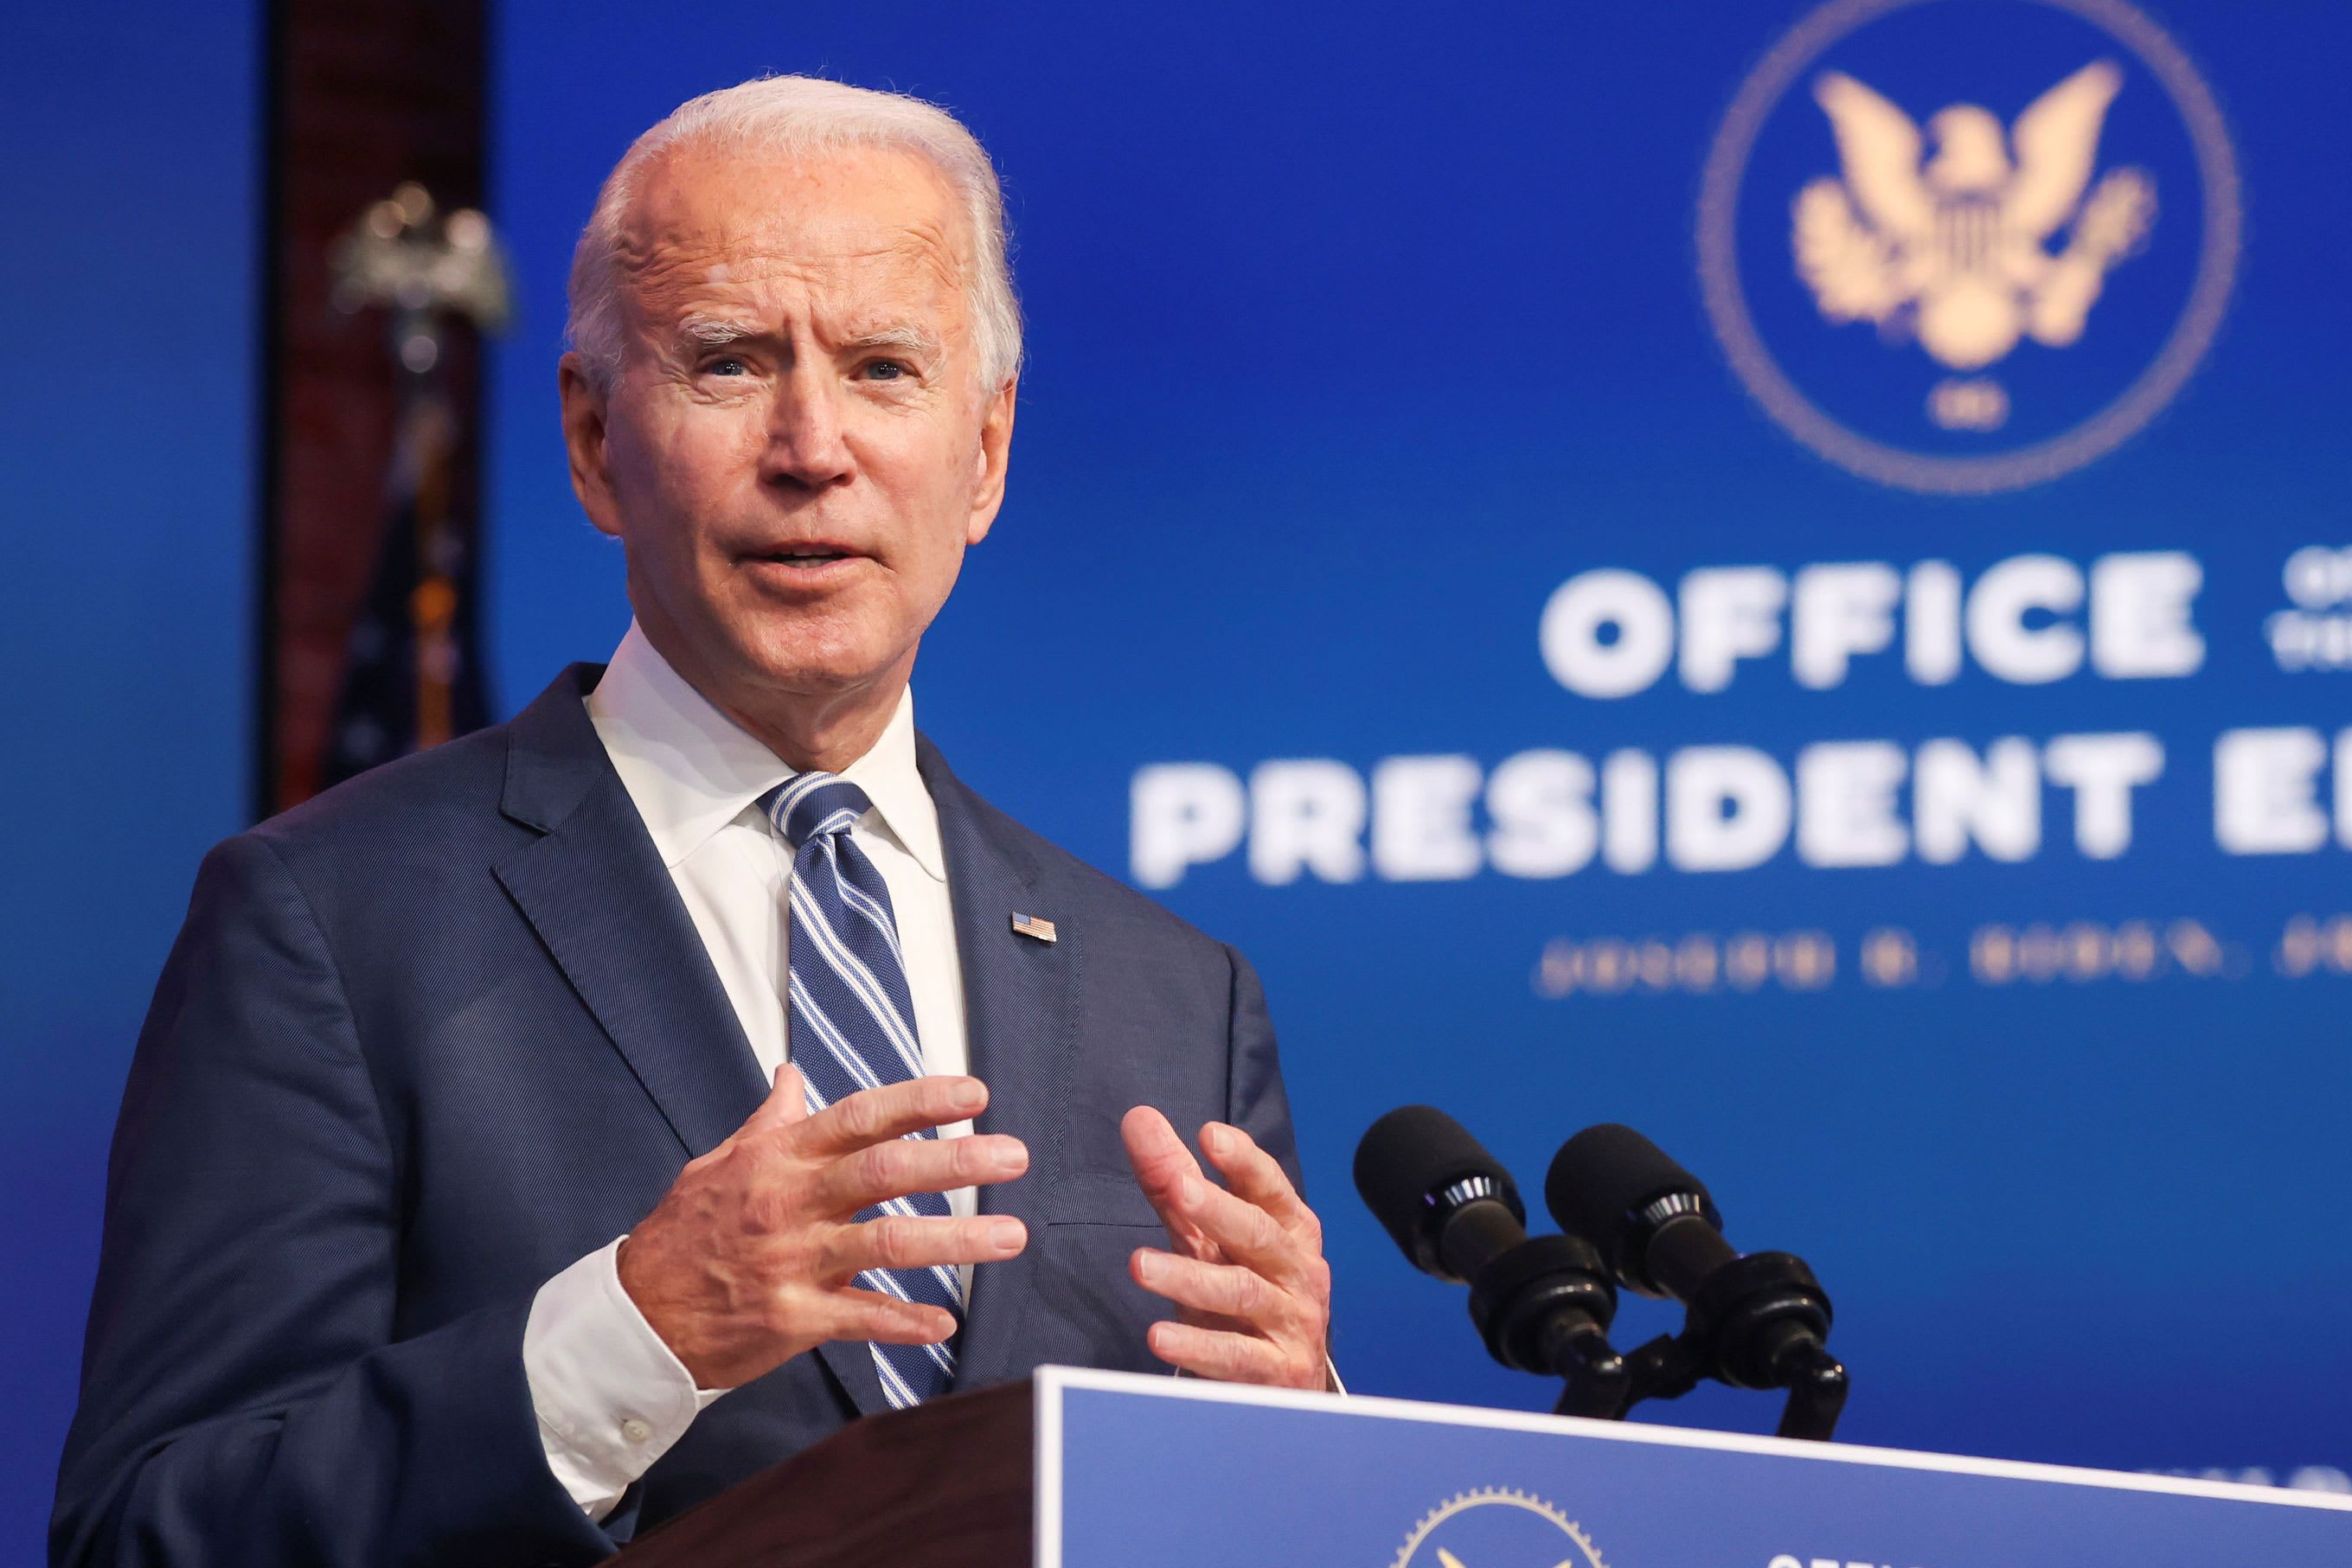 President-elect Joe Biden speaks at a convention. Image by StratosBrilakis/shutterstock. United States, 2020